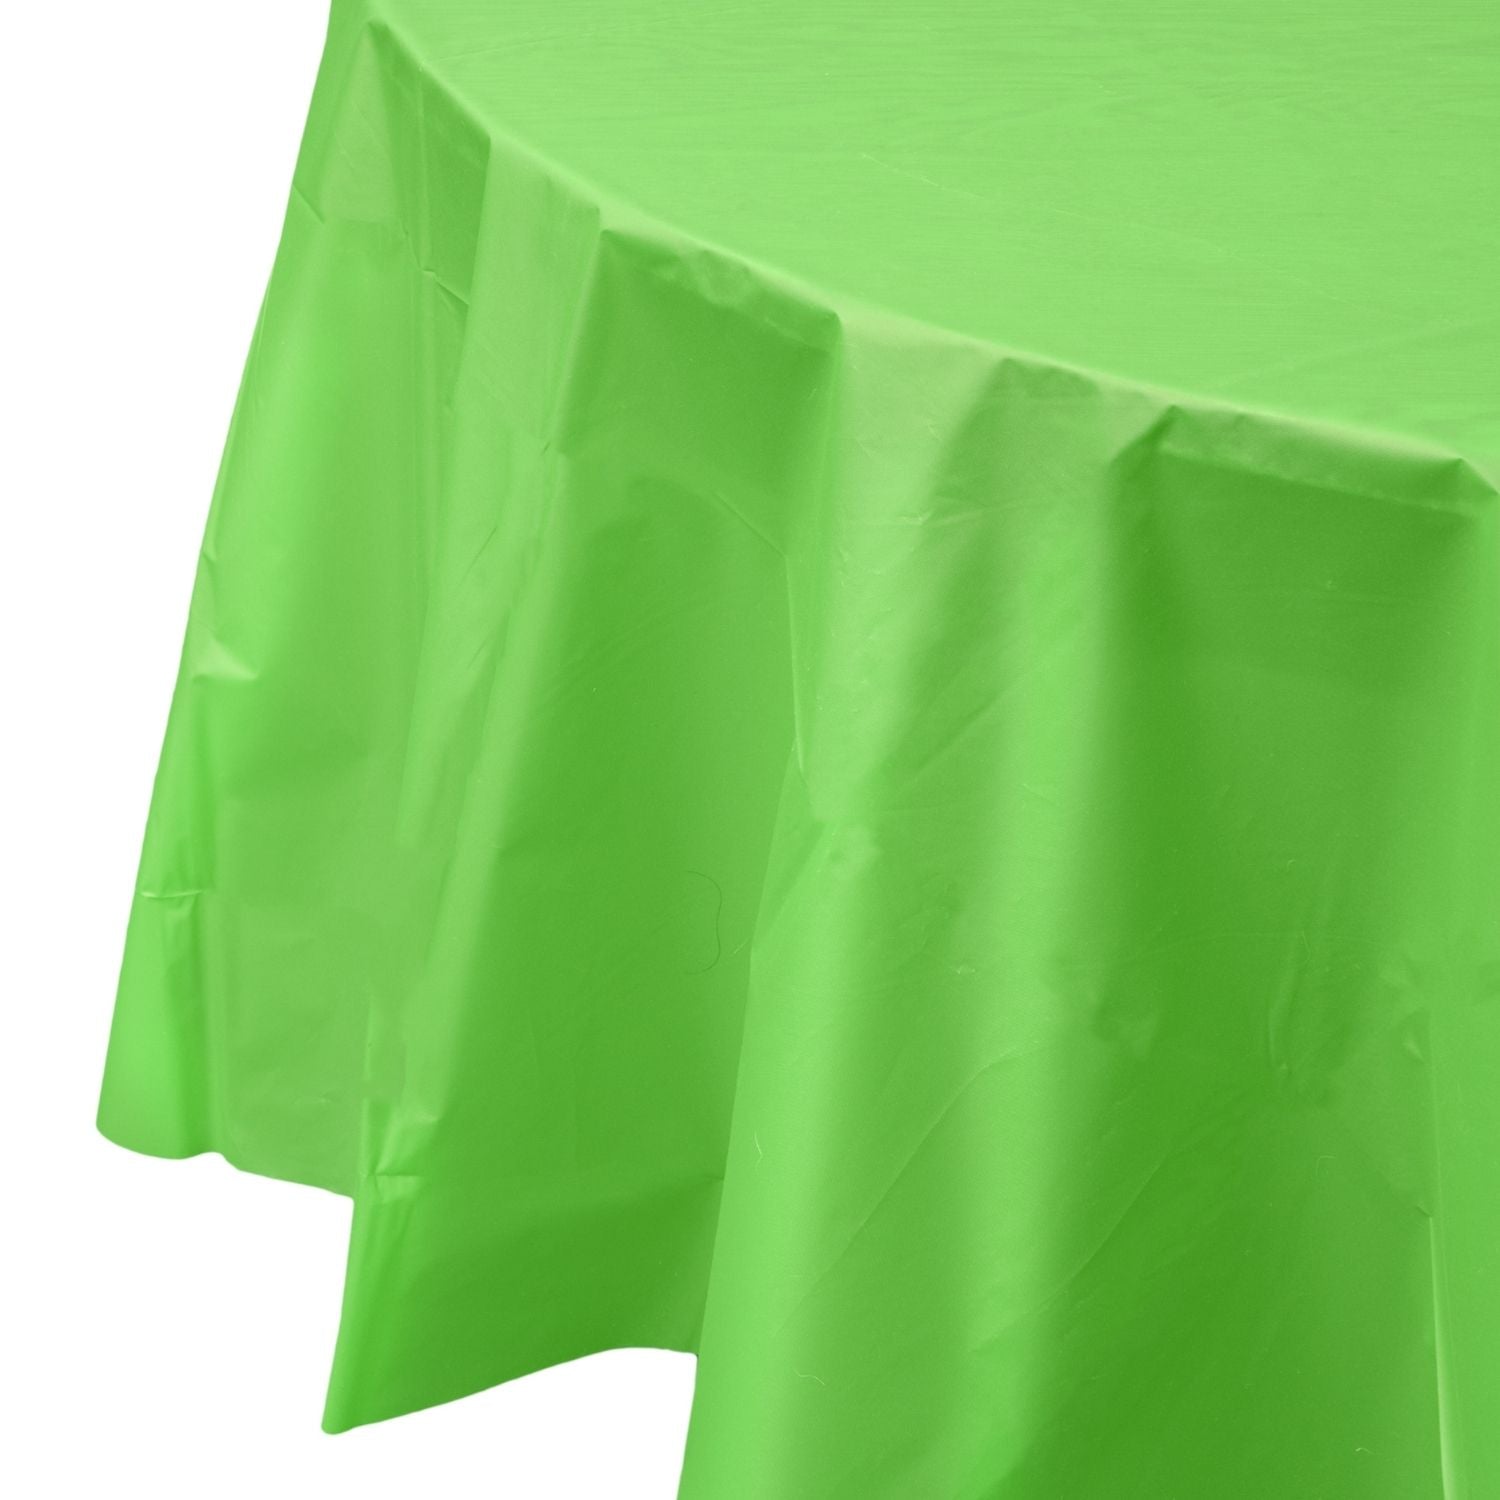 Lime Green Round Plastic Tablecloth | 48 Count